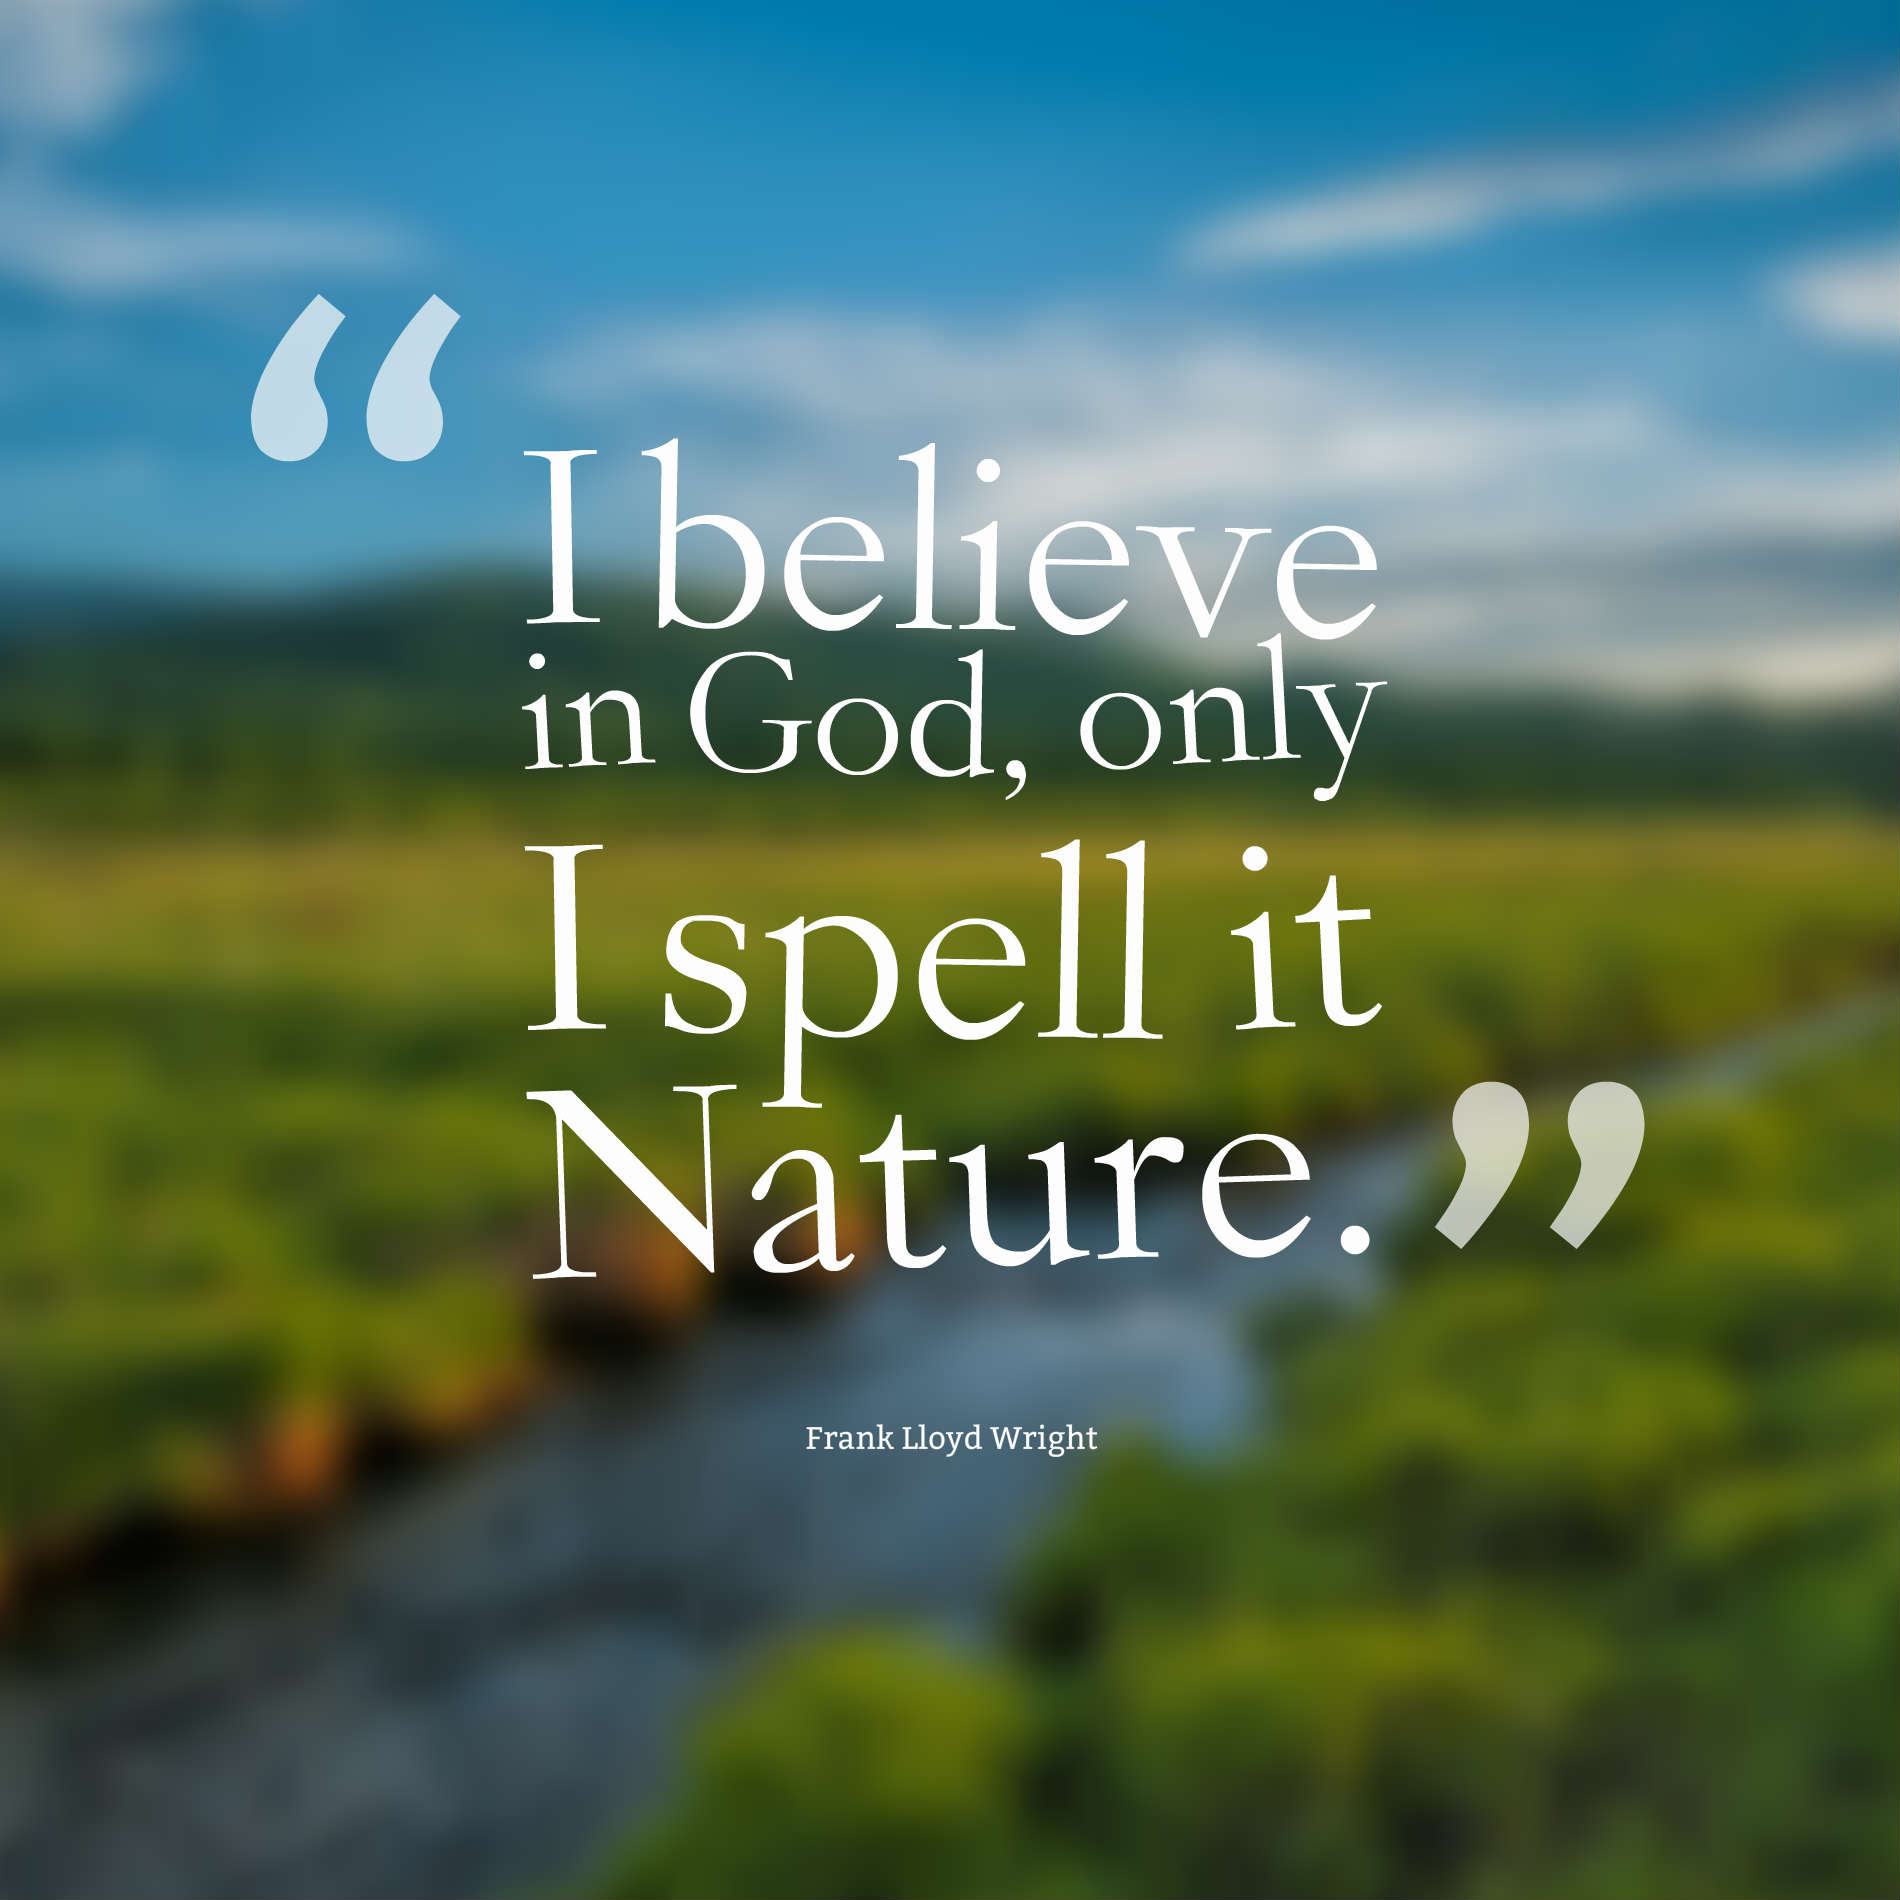 I believe in God, only I spell it Nature.